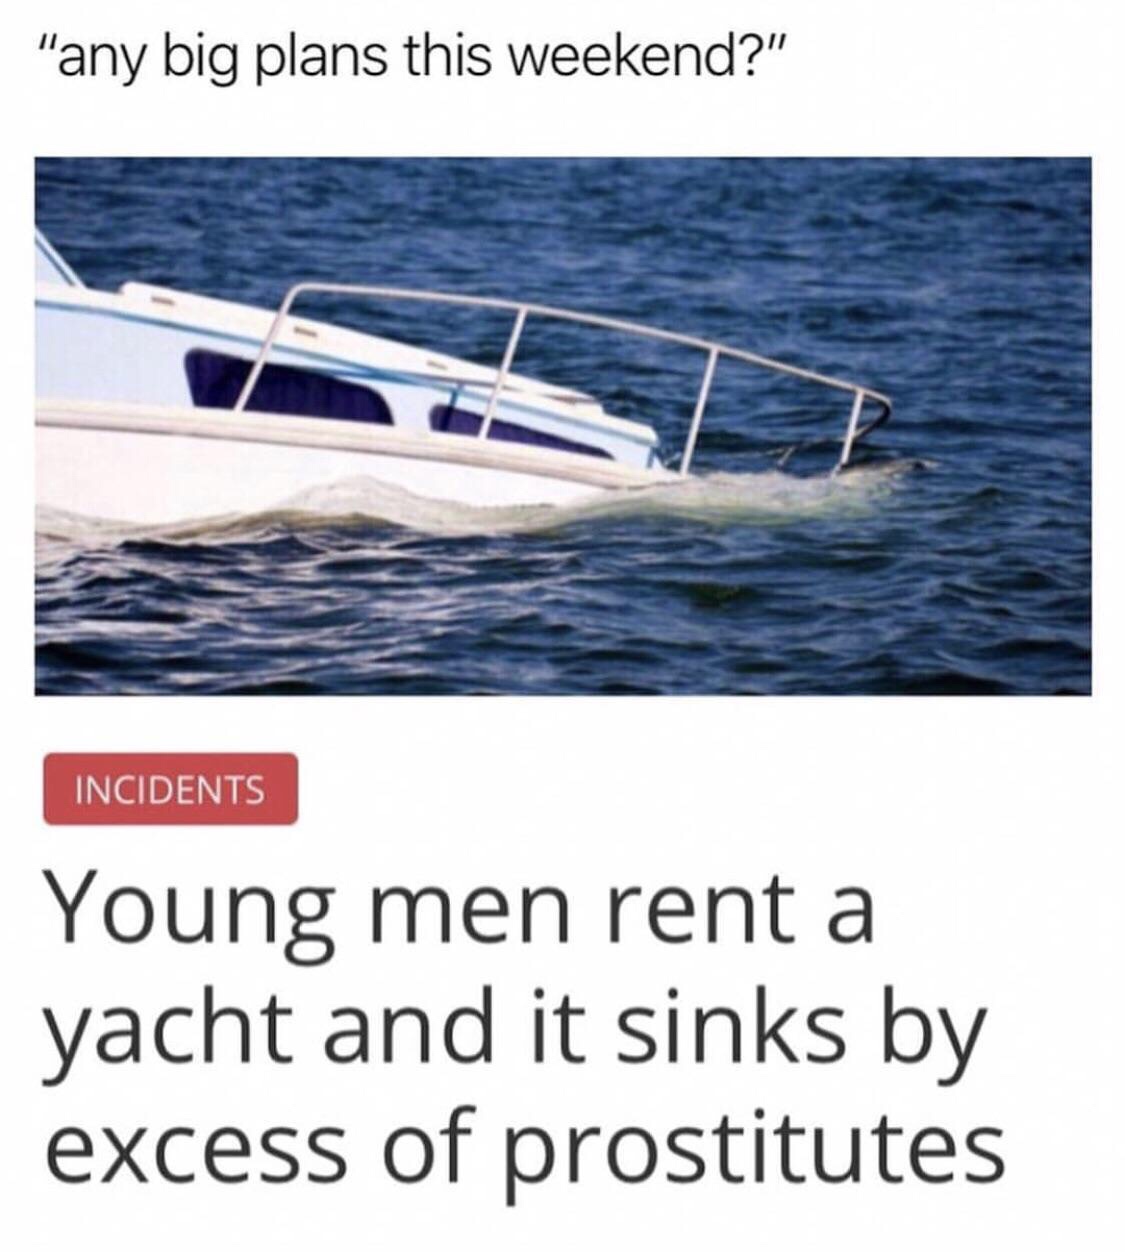 yacht sinks prostitutes - "any big plans this weekend?" Incidents Young men rent a yacht and it sinks by excess of prostitutes